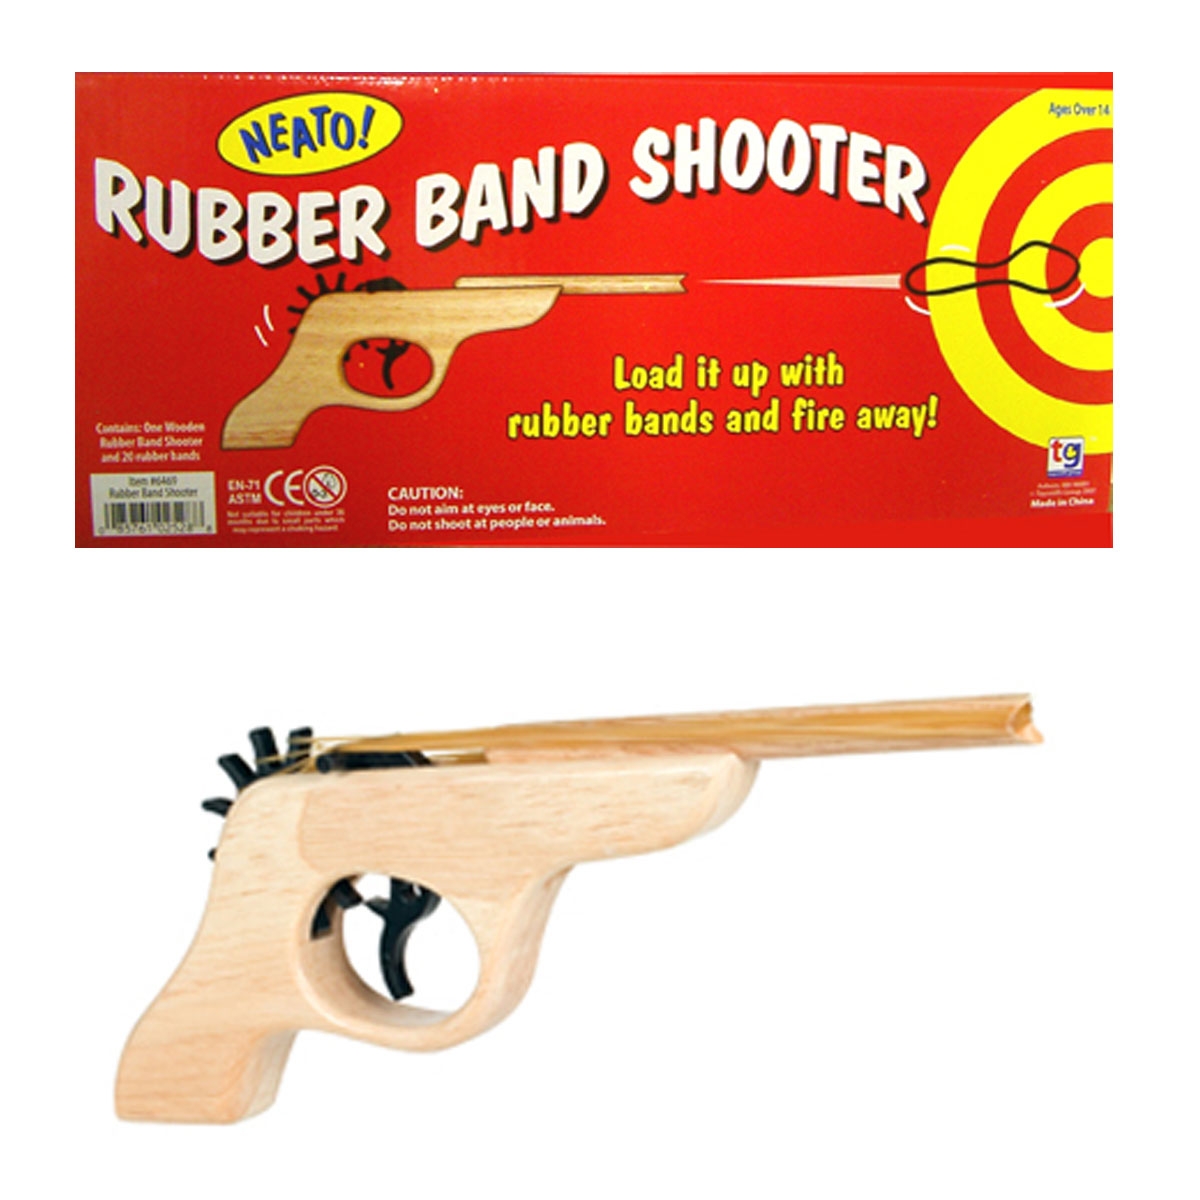 B94 NEW Micro Blaster rubber Band Shooter Novelty Toy by Hog Wild shoots 20ft 